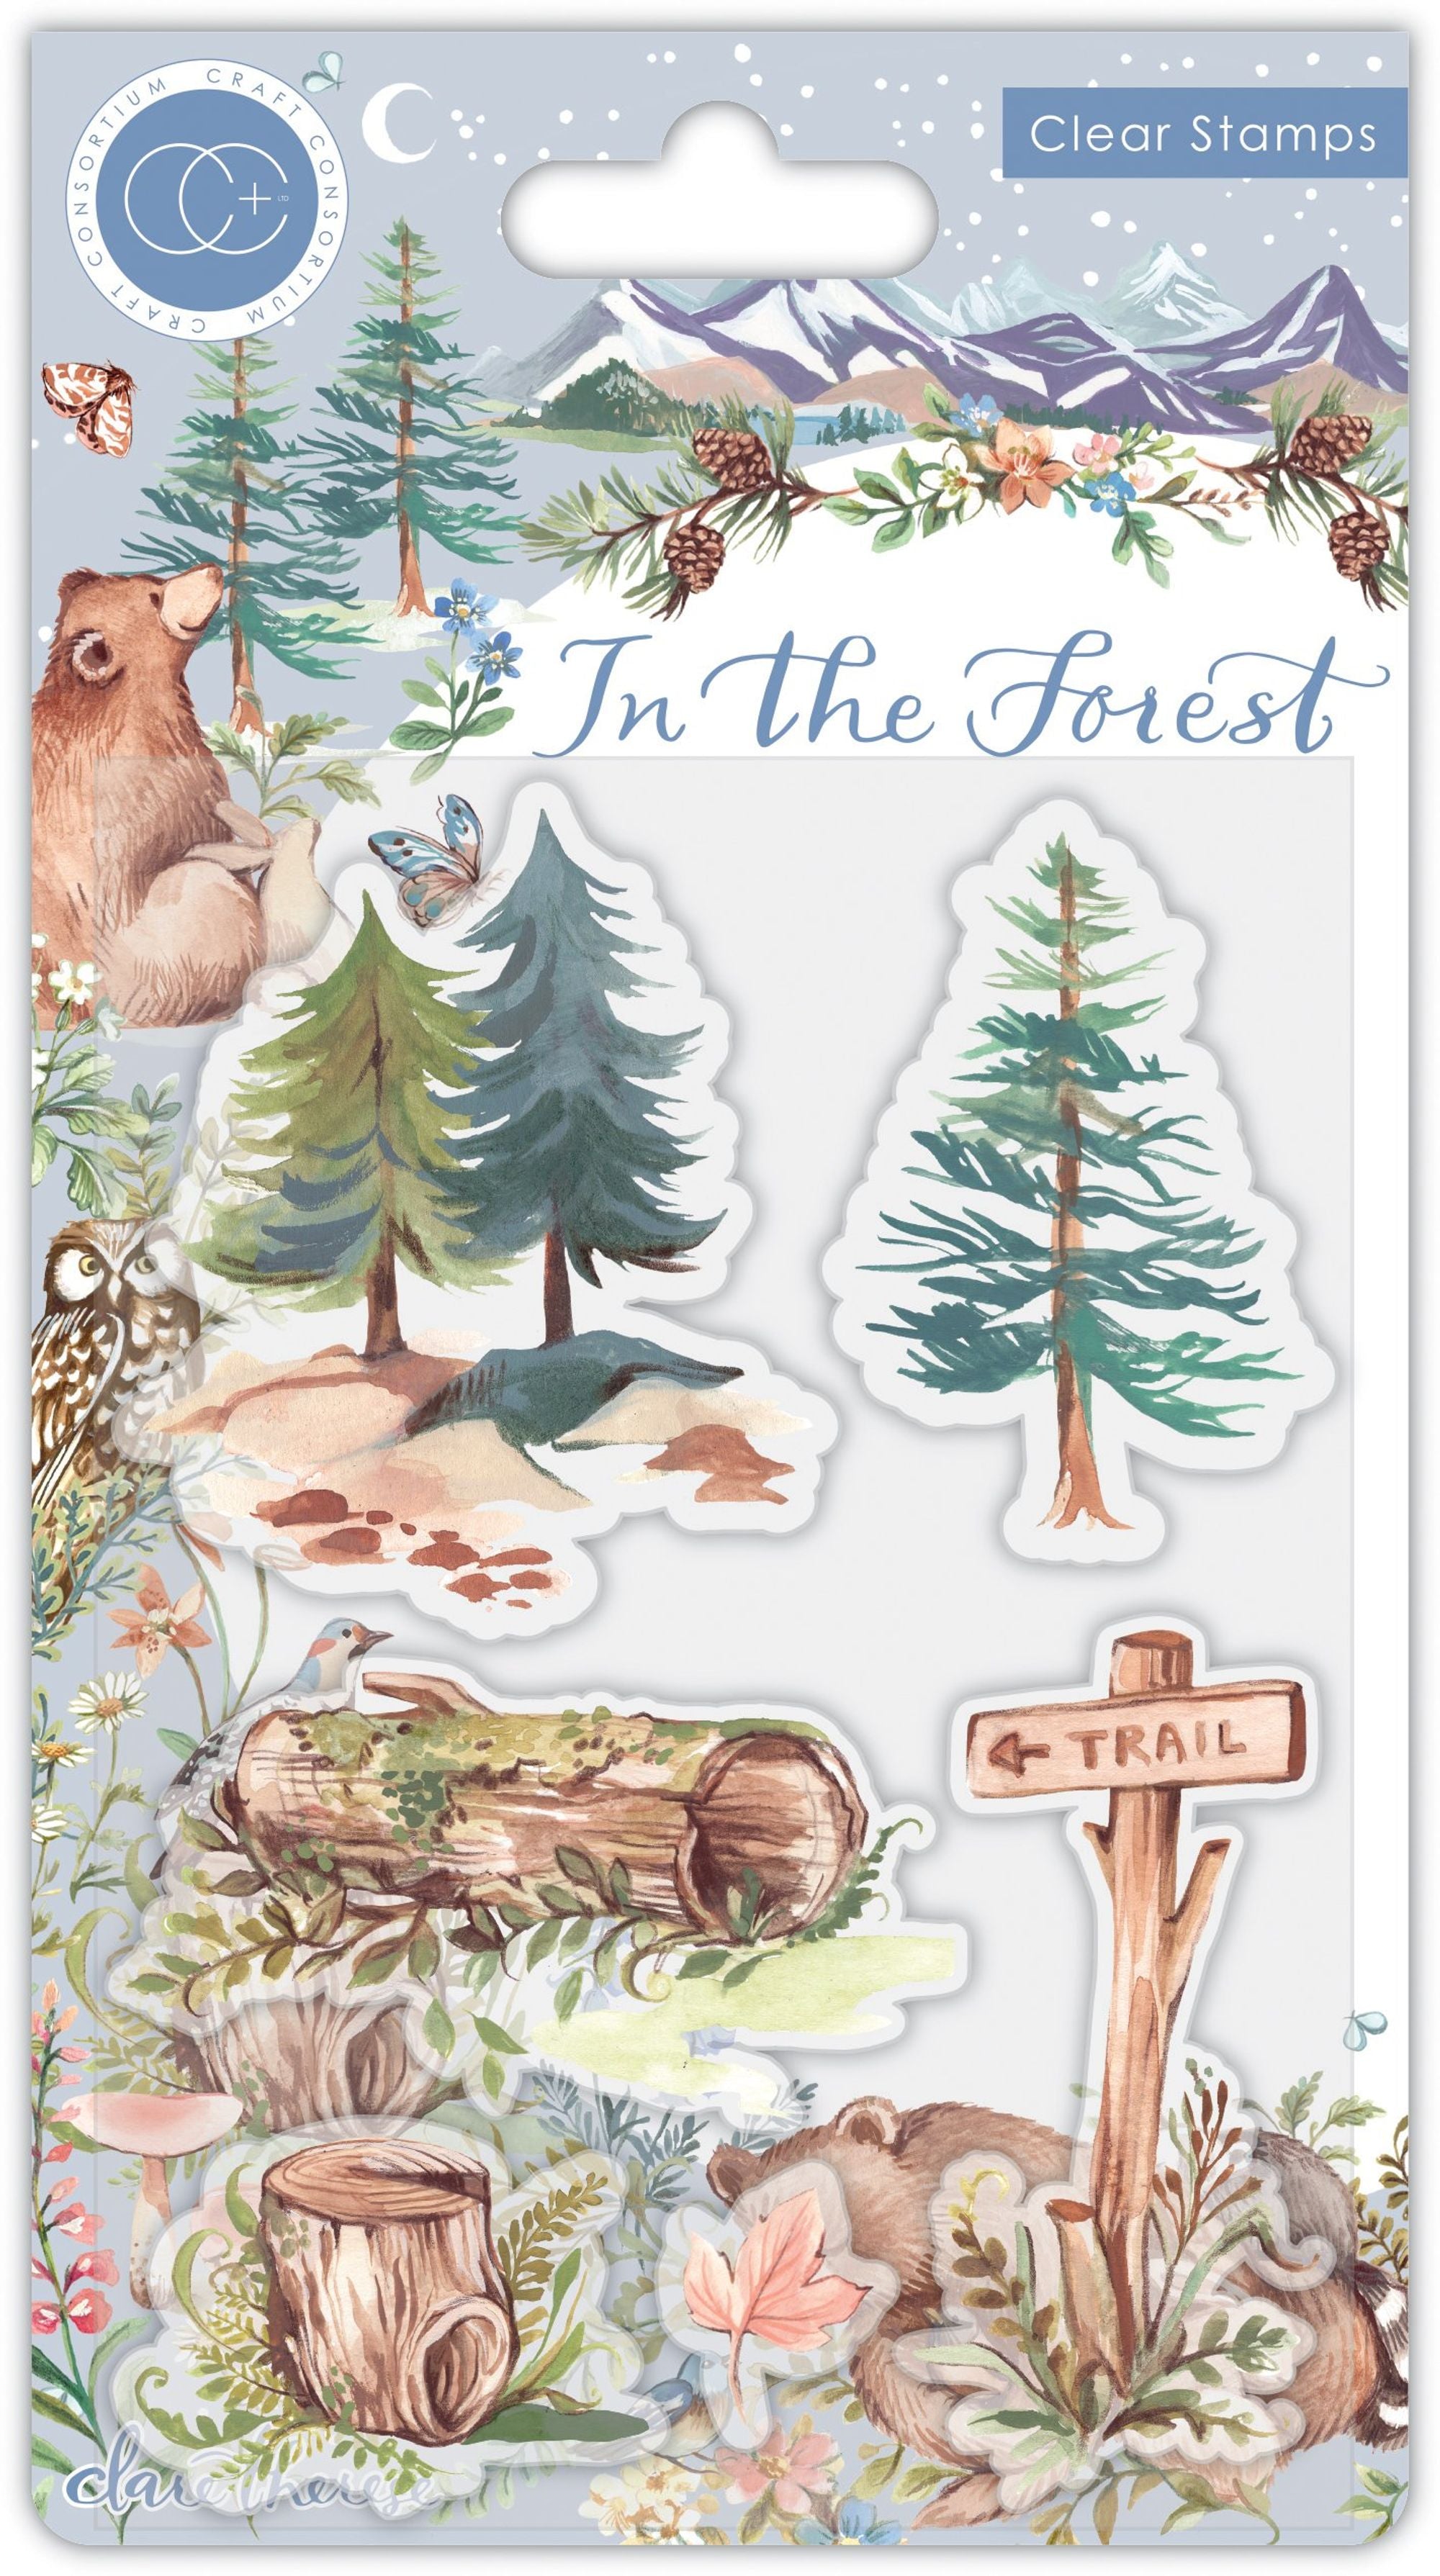 In The Forest - Stamp Set - In the Forest